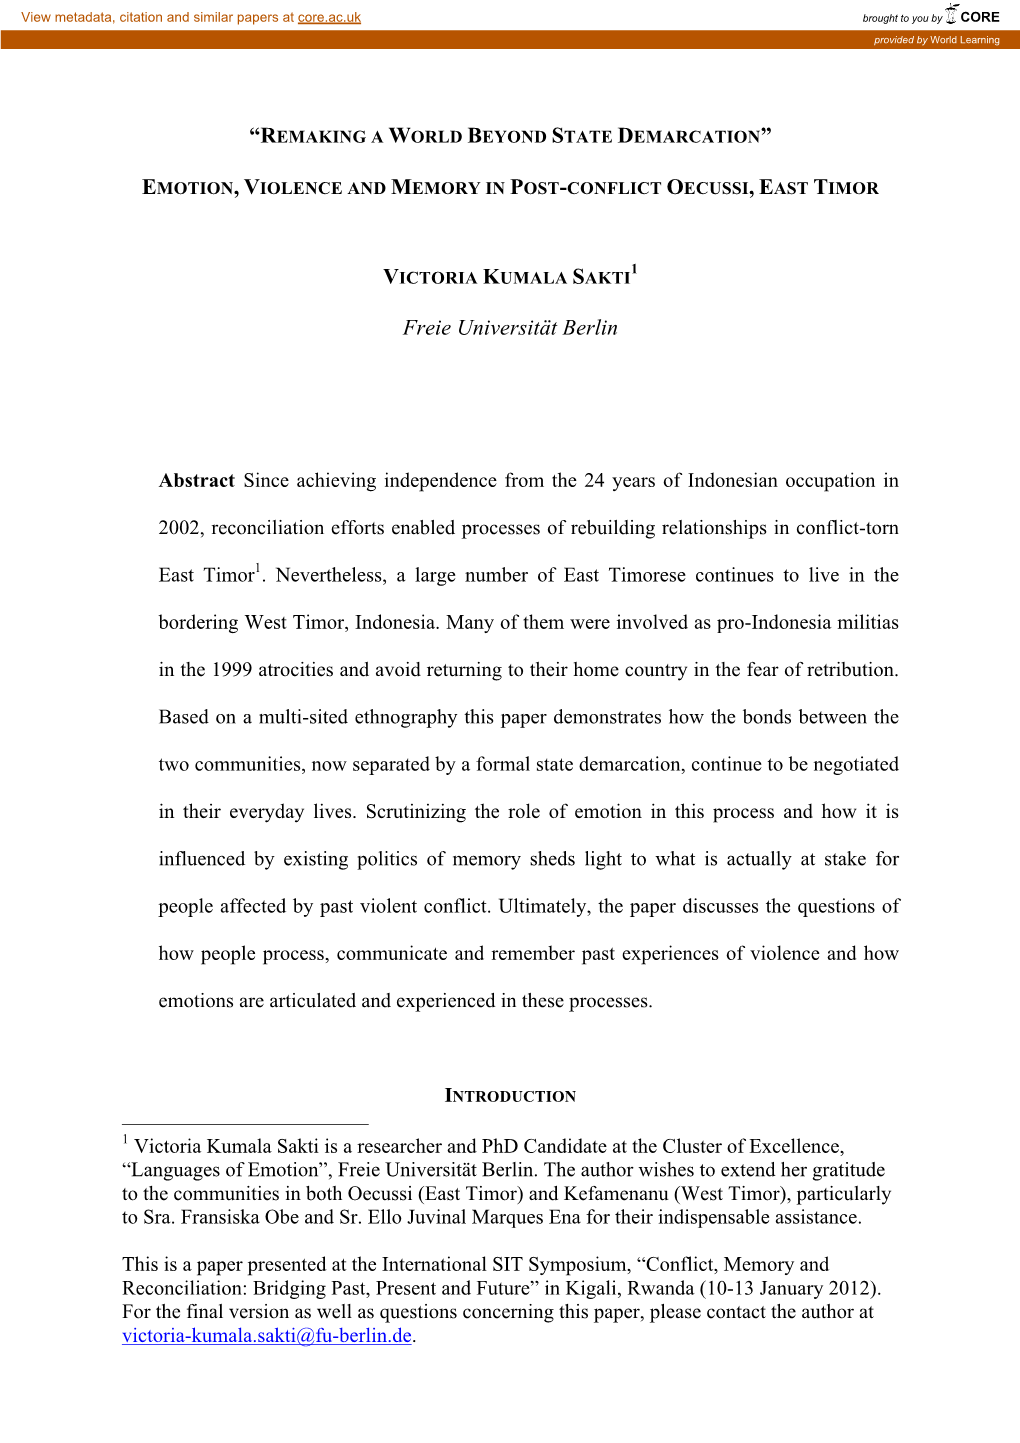 Emotion, Violence and Memory in Post-Conflict Oecussi, East Timor